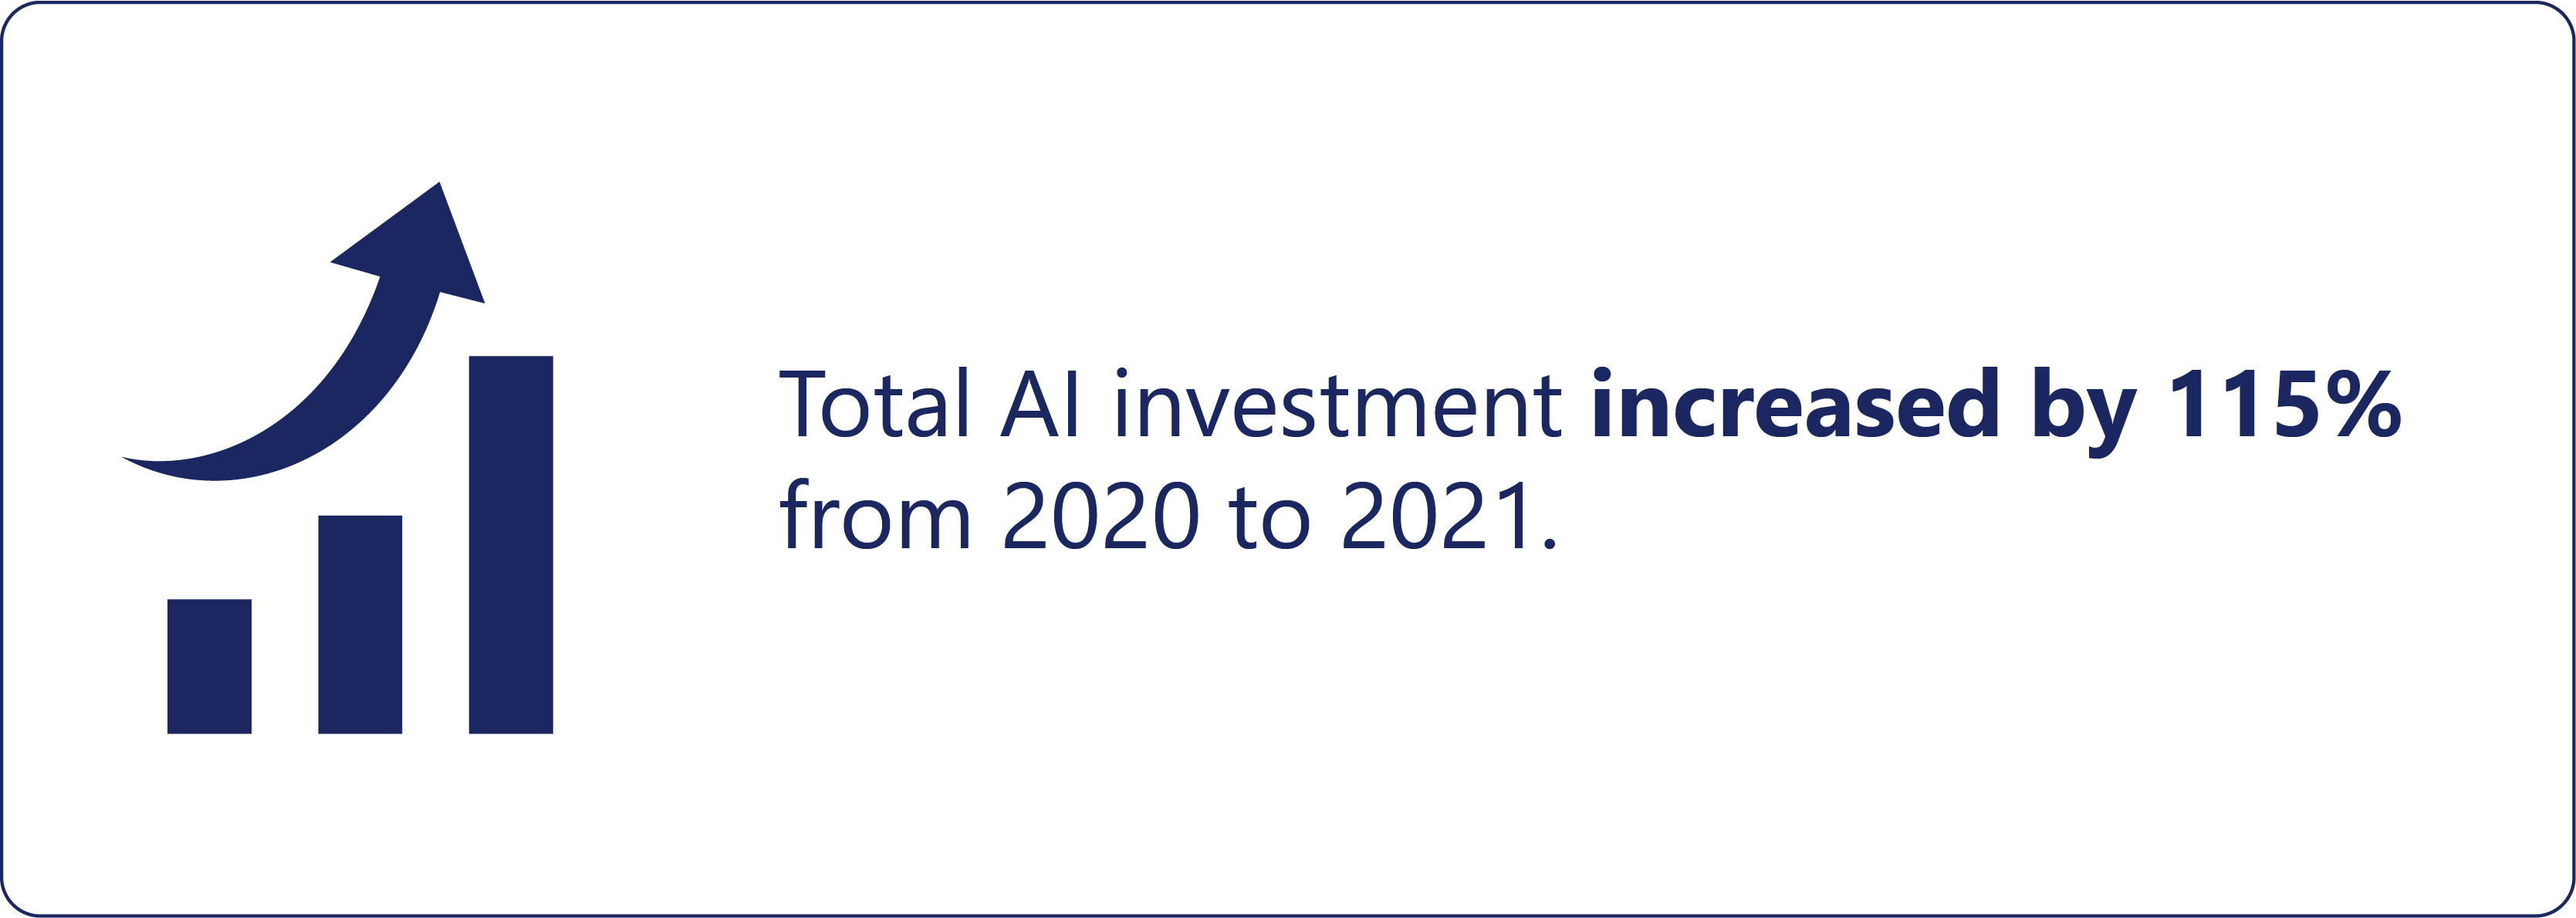 Total AI  investment increased by 115% from 2020 to 2021